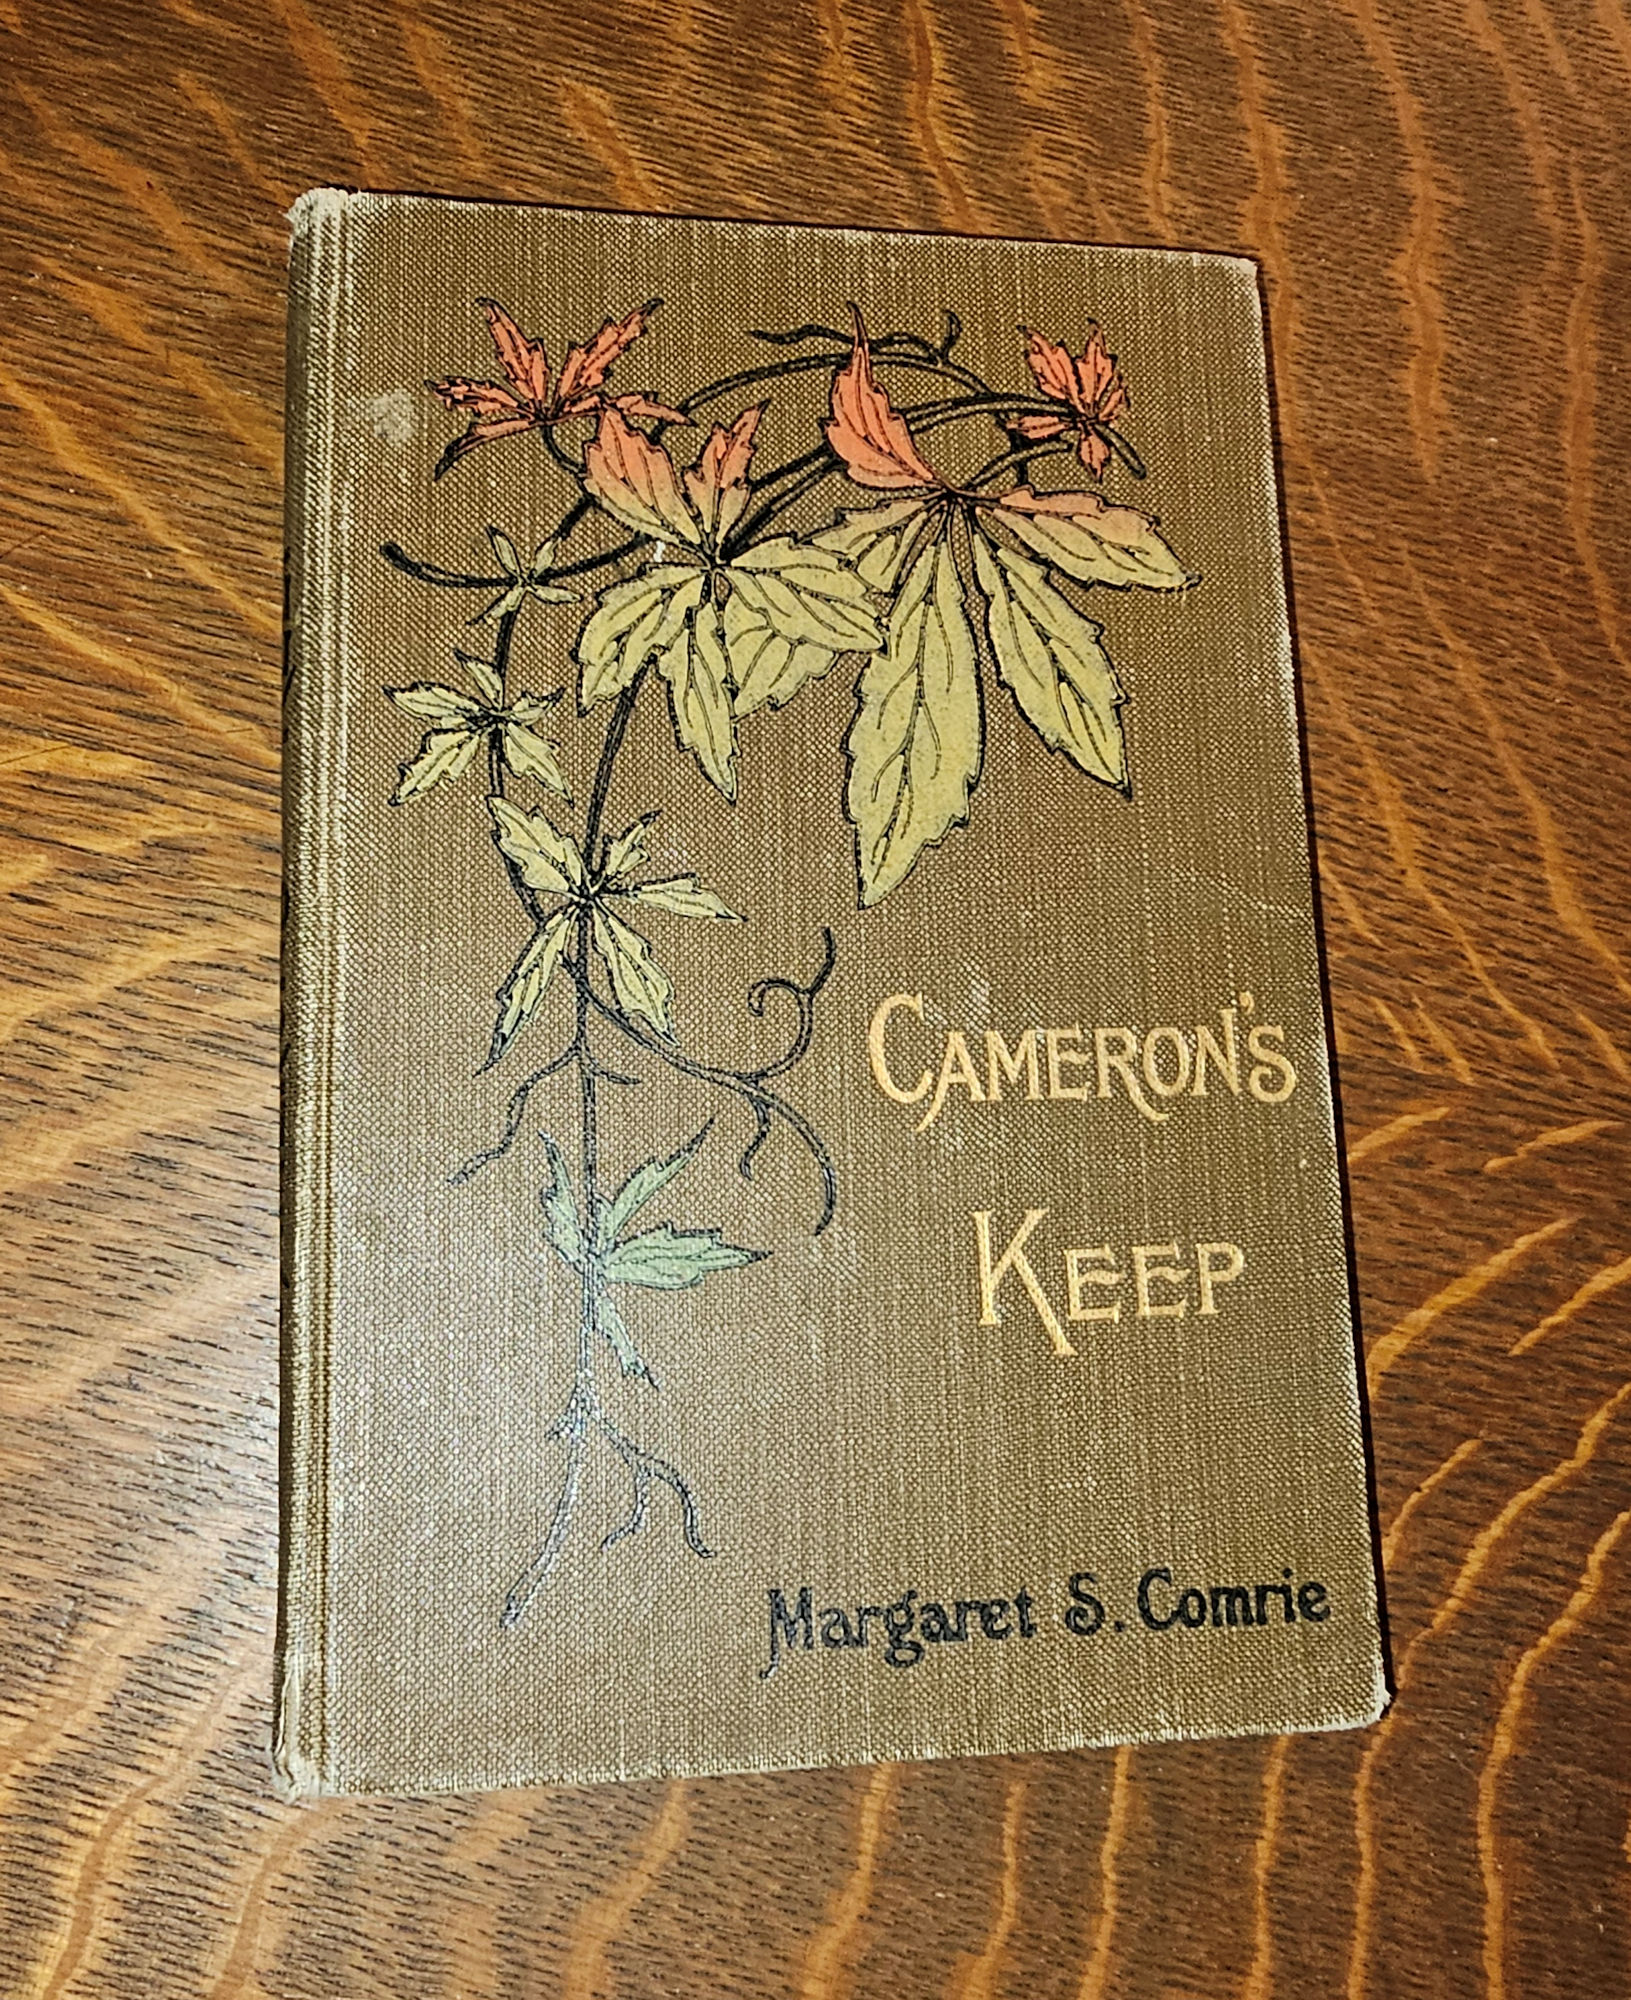 Cameron's Keep; or, The Course and The
                        Crown (Little Dot Series) by Margaret S. Comrie